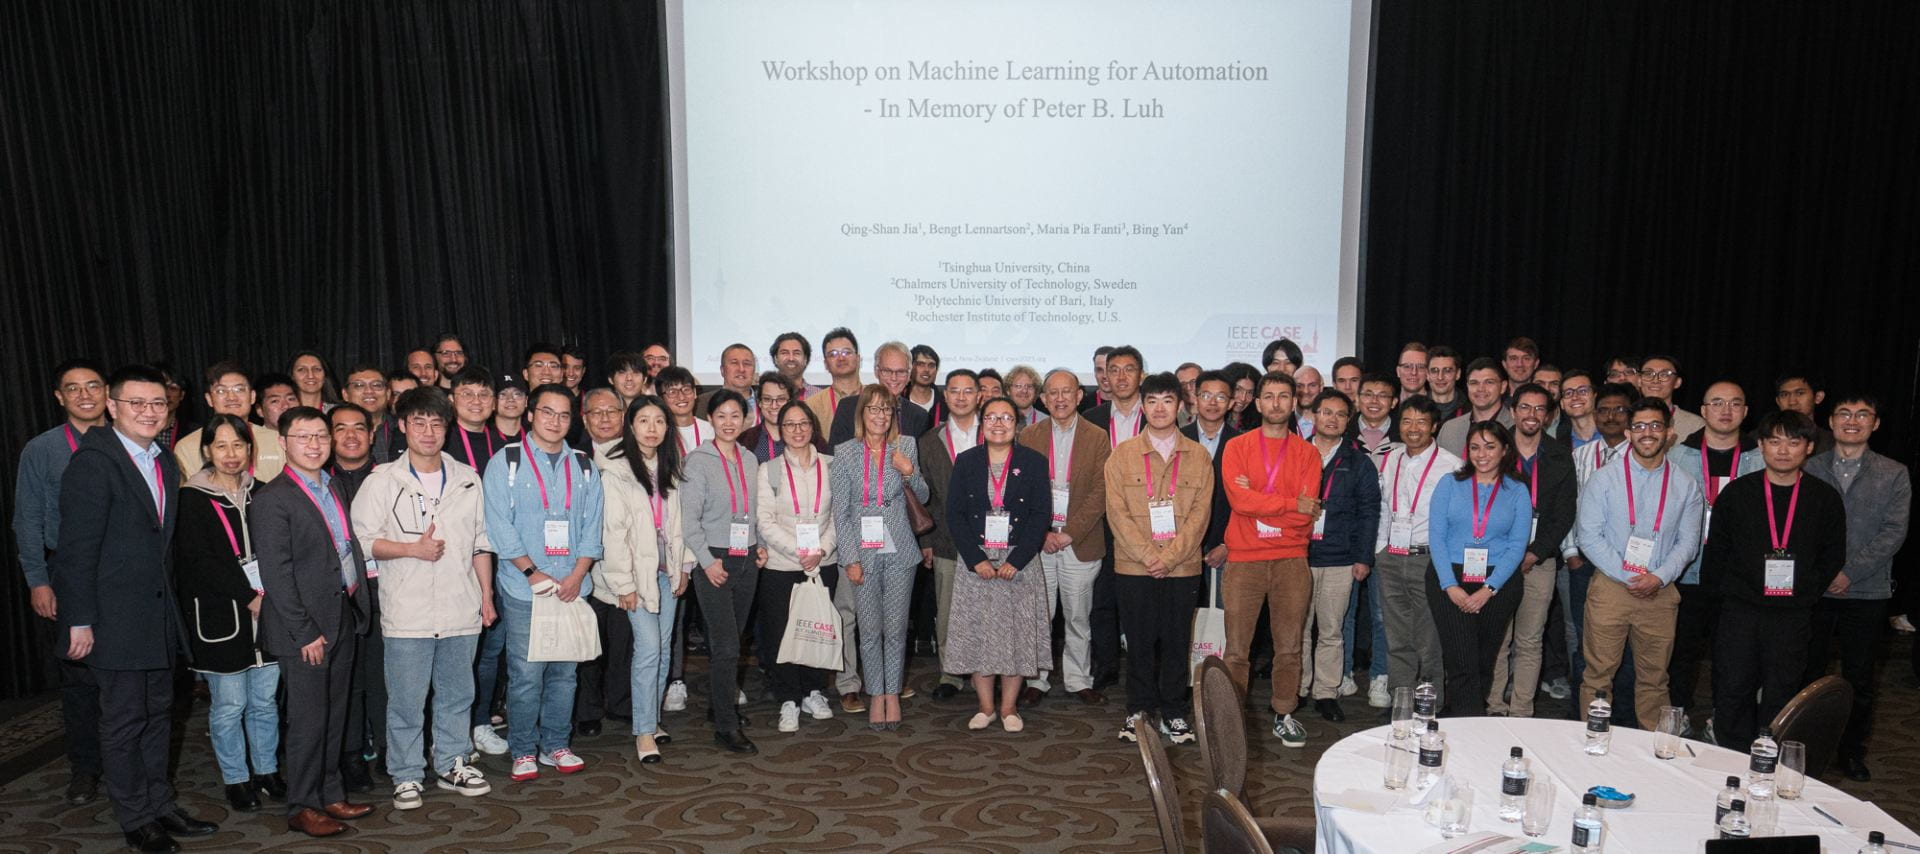 Workshop on Machine Learning for Automation